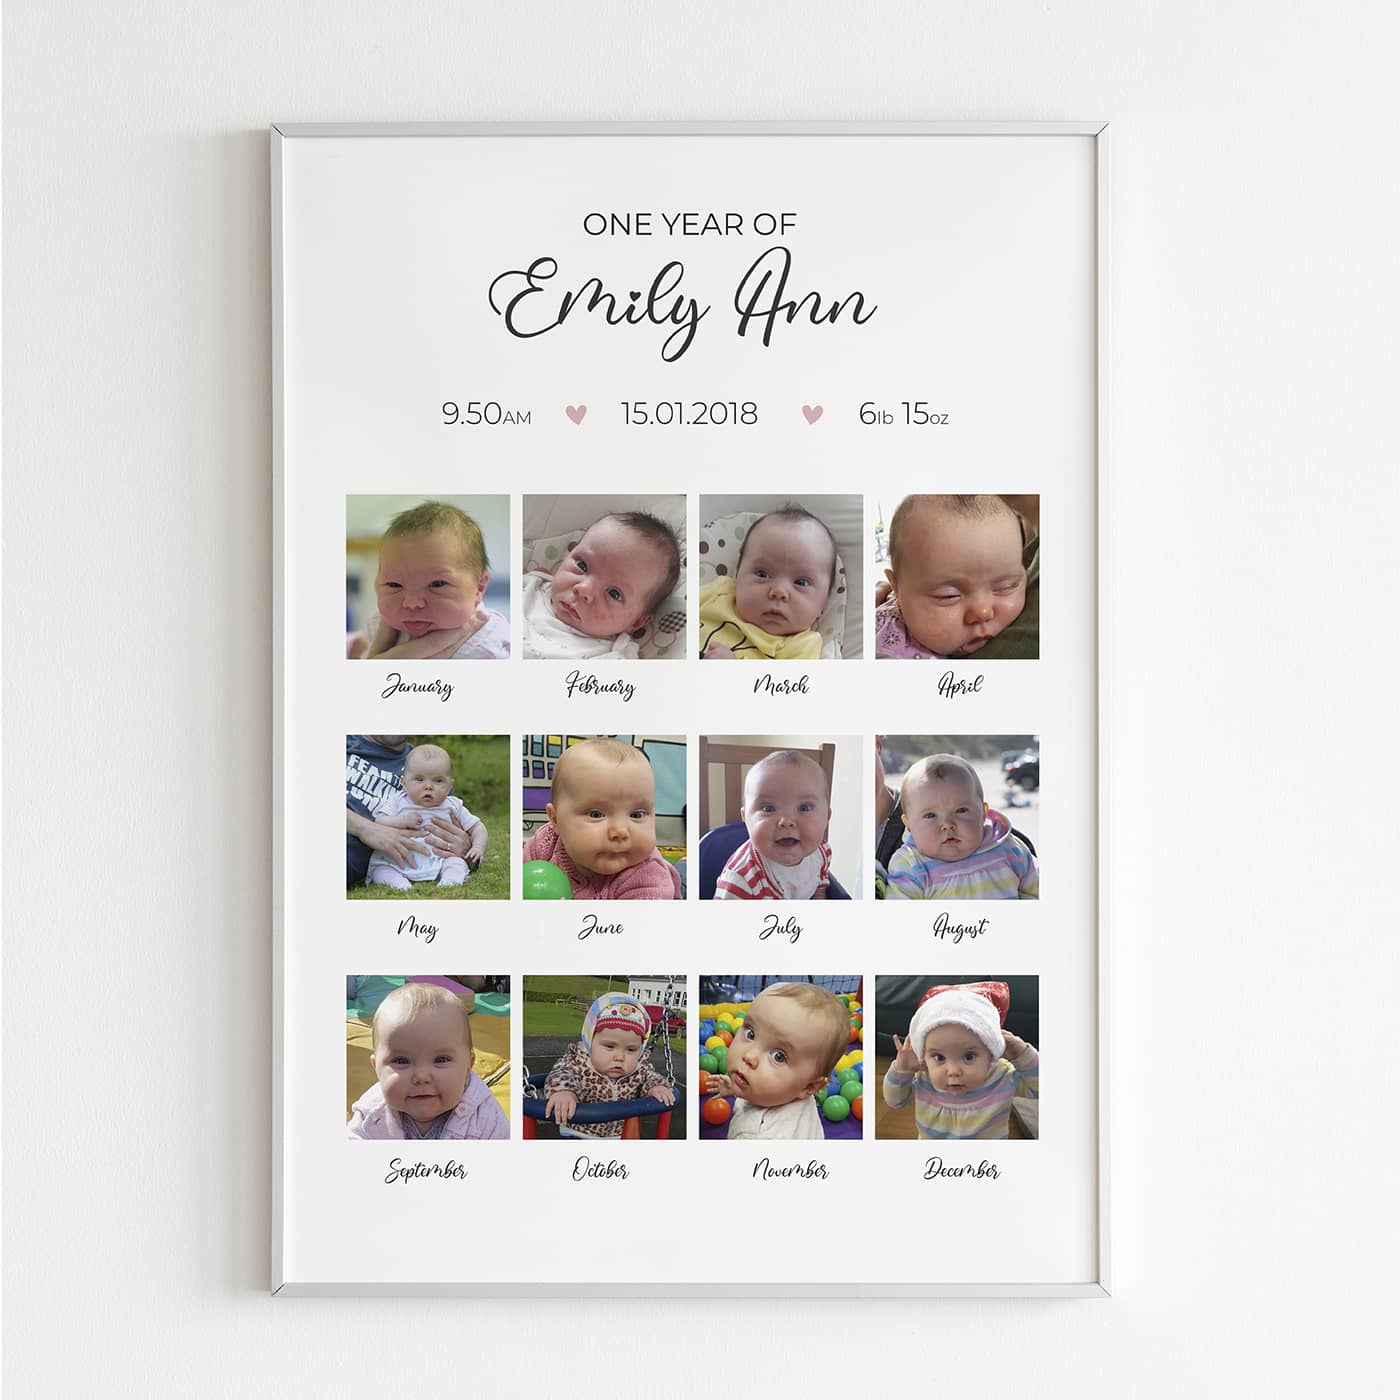 Baby's first year photo collage poster, printed in County Monaghan, Ireland by Design Gaff